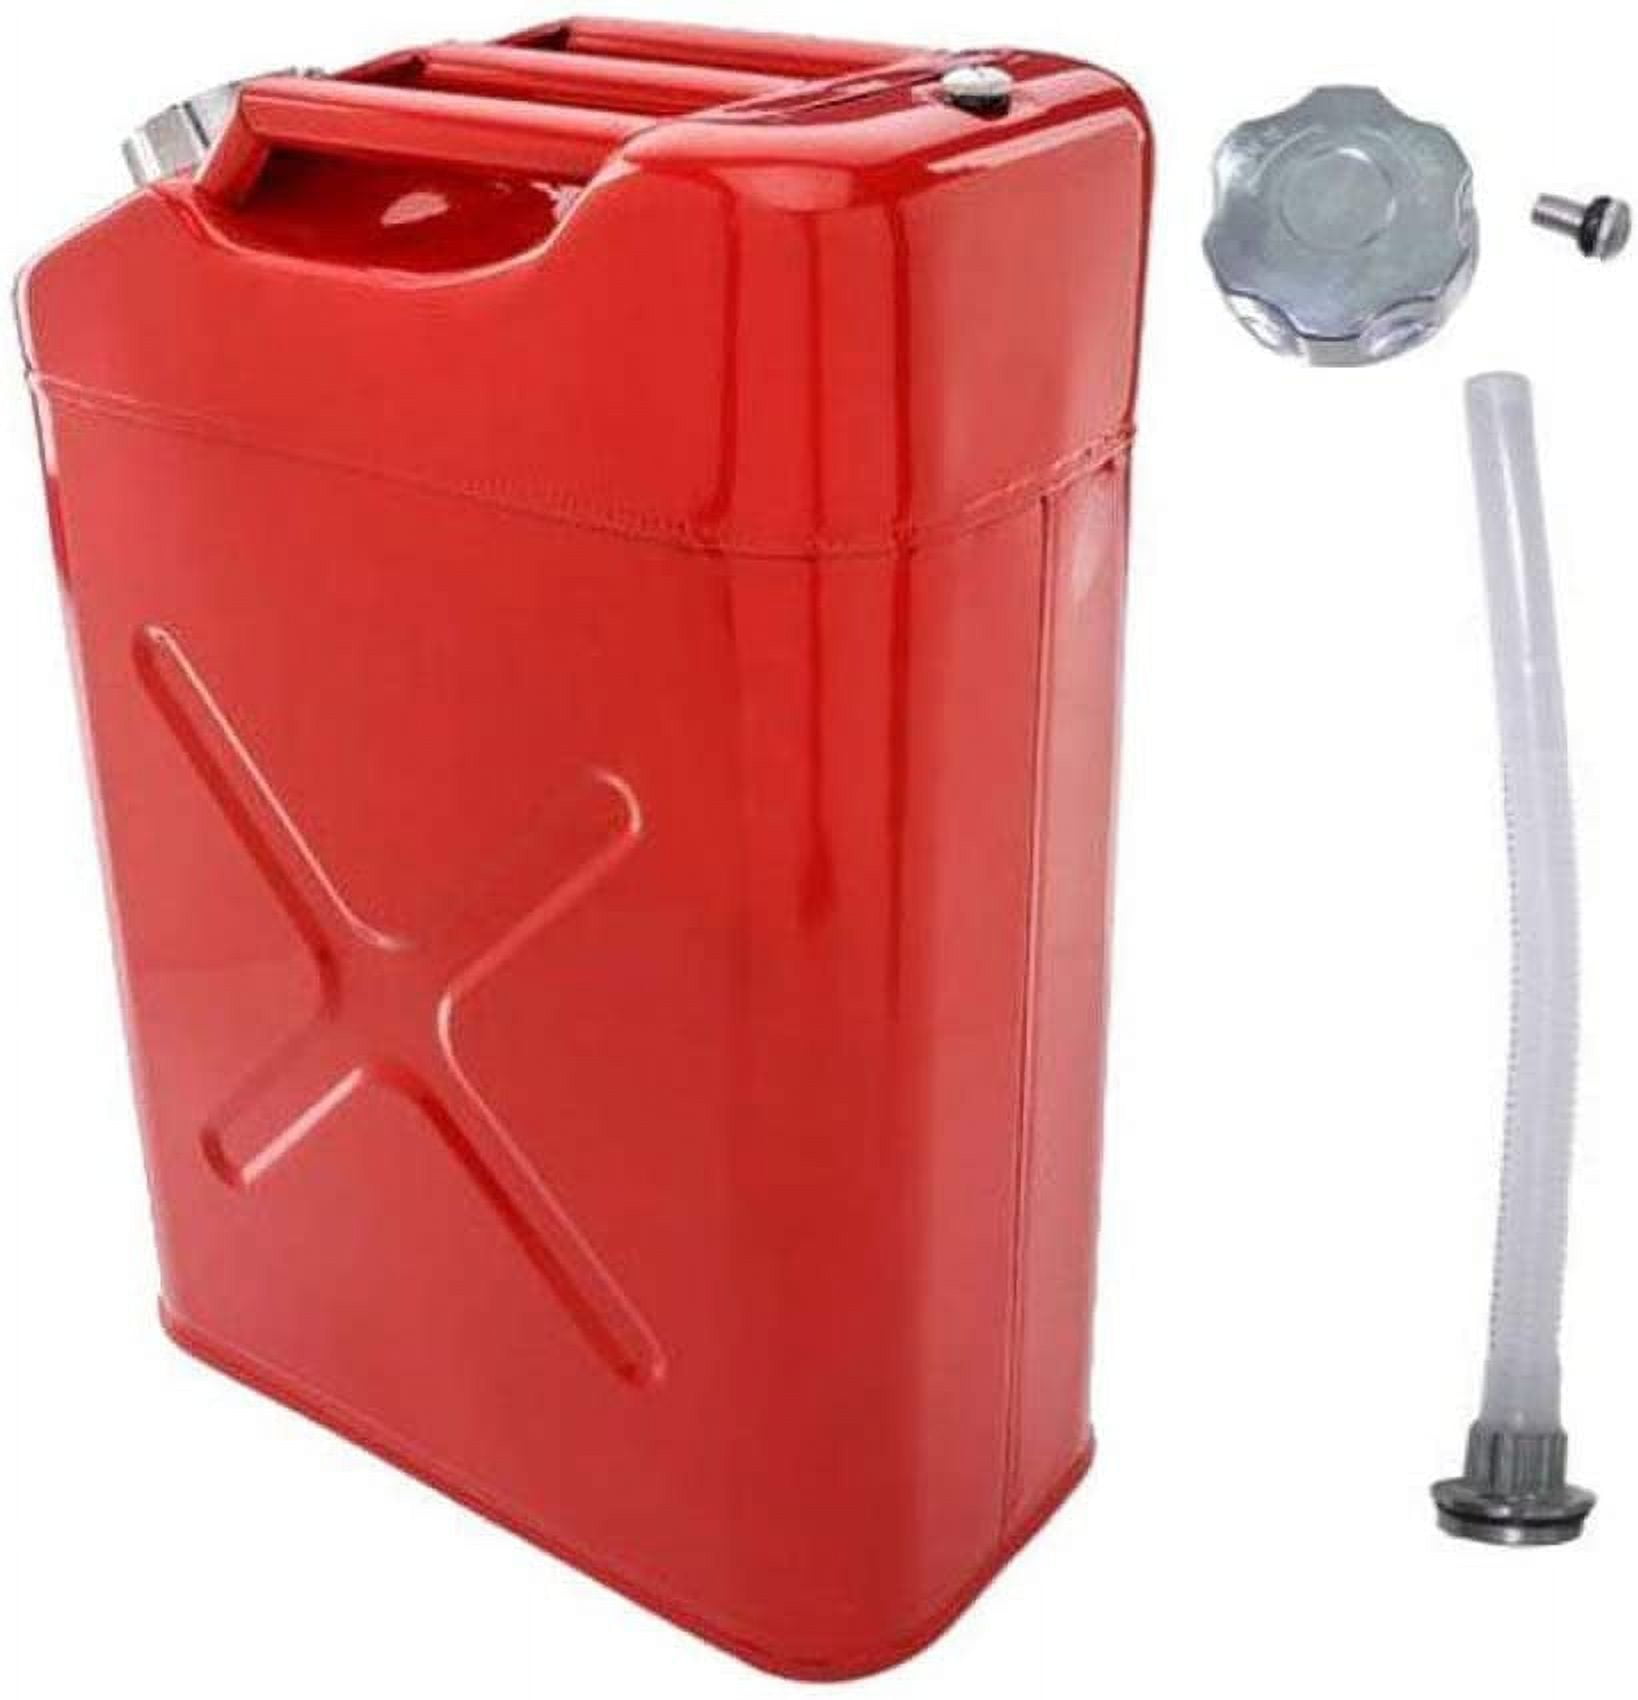 20L (5 Gallon) Petrol Diesel Fuel Can Gasoline Bucket Fuel Can with Oil  Pipe Flexible Spout, Portable Fuel Tank for Fuels Gasoline Cars, Trucks,  Equipment 